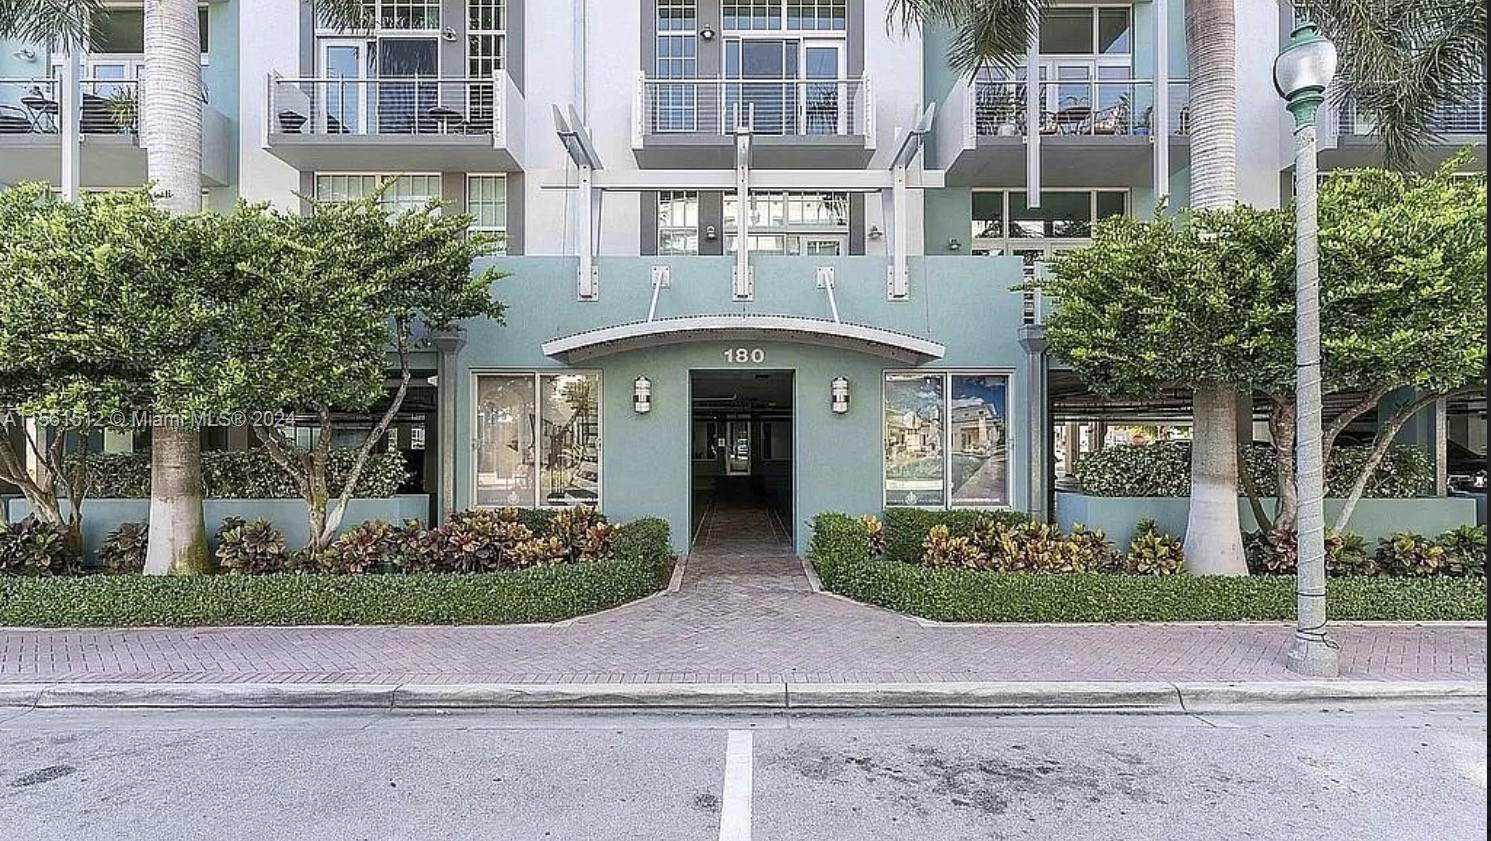 This charming 1 bedroom, 1 bathroom condo in Delray Beach, FL was built in 2005 and offers a cozy living space of 927 sq.